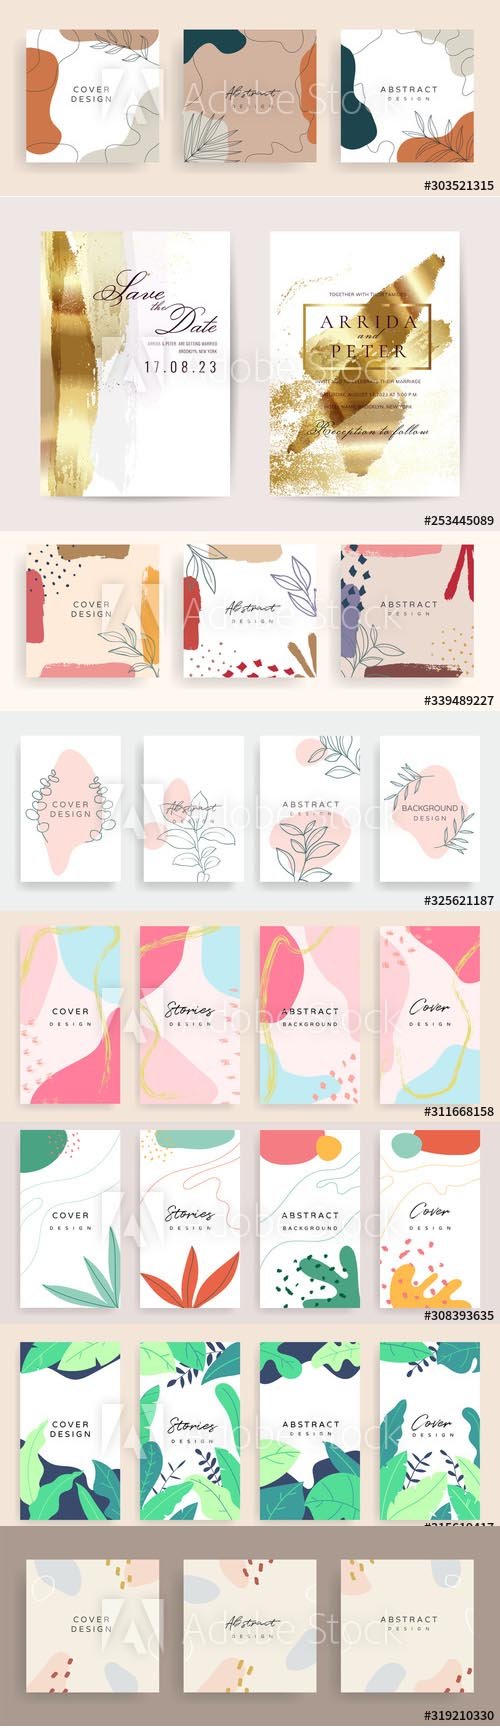 Hand-Draw Abstract Backgrounds for Invitation Template Vol 3